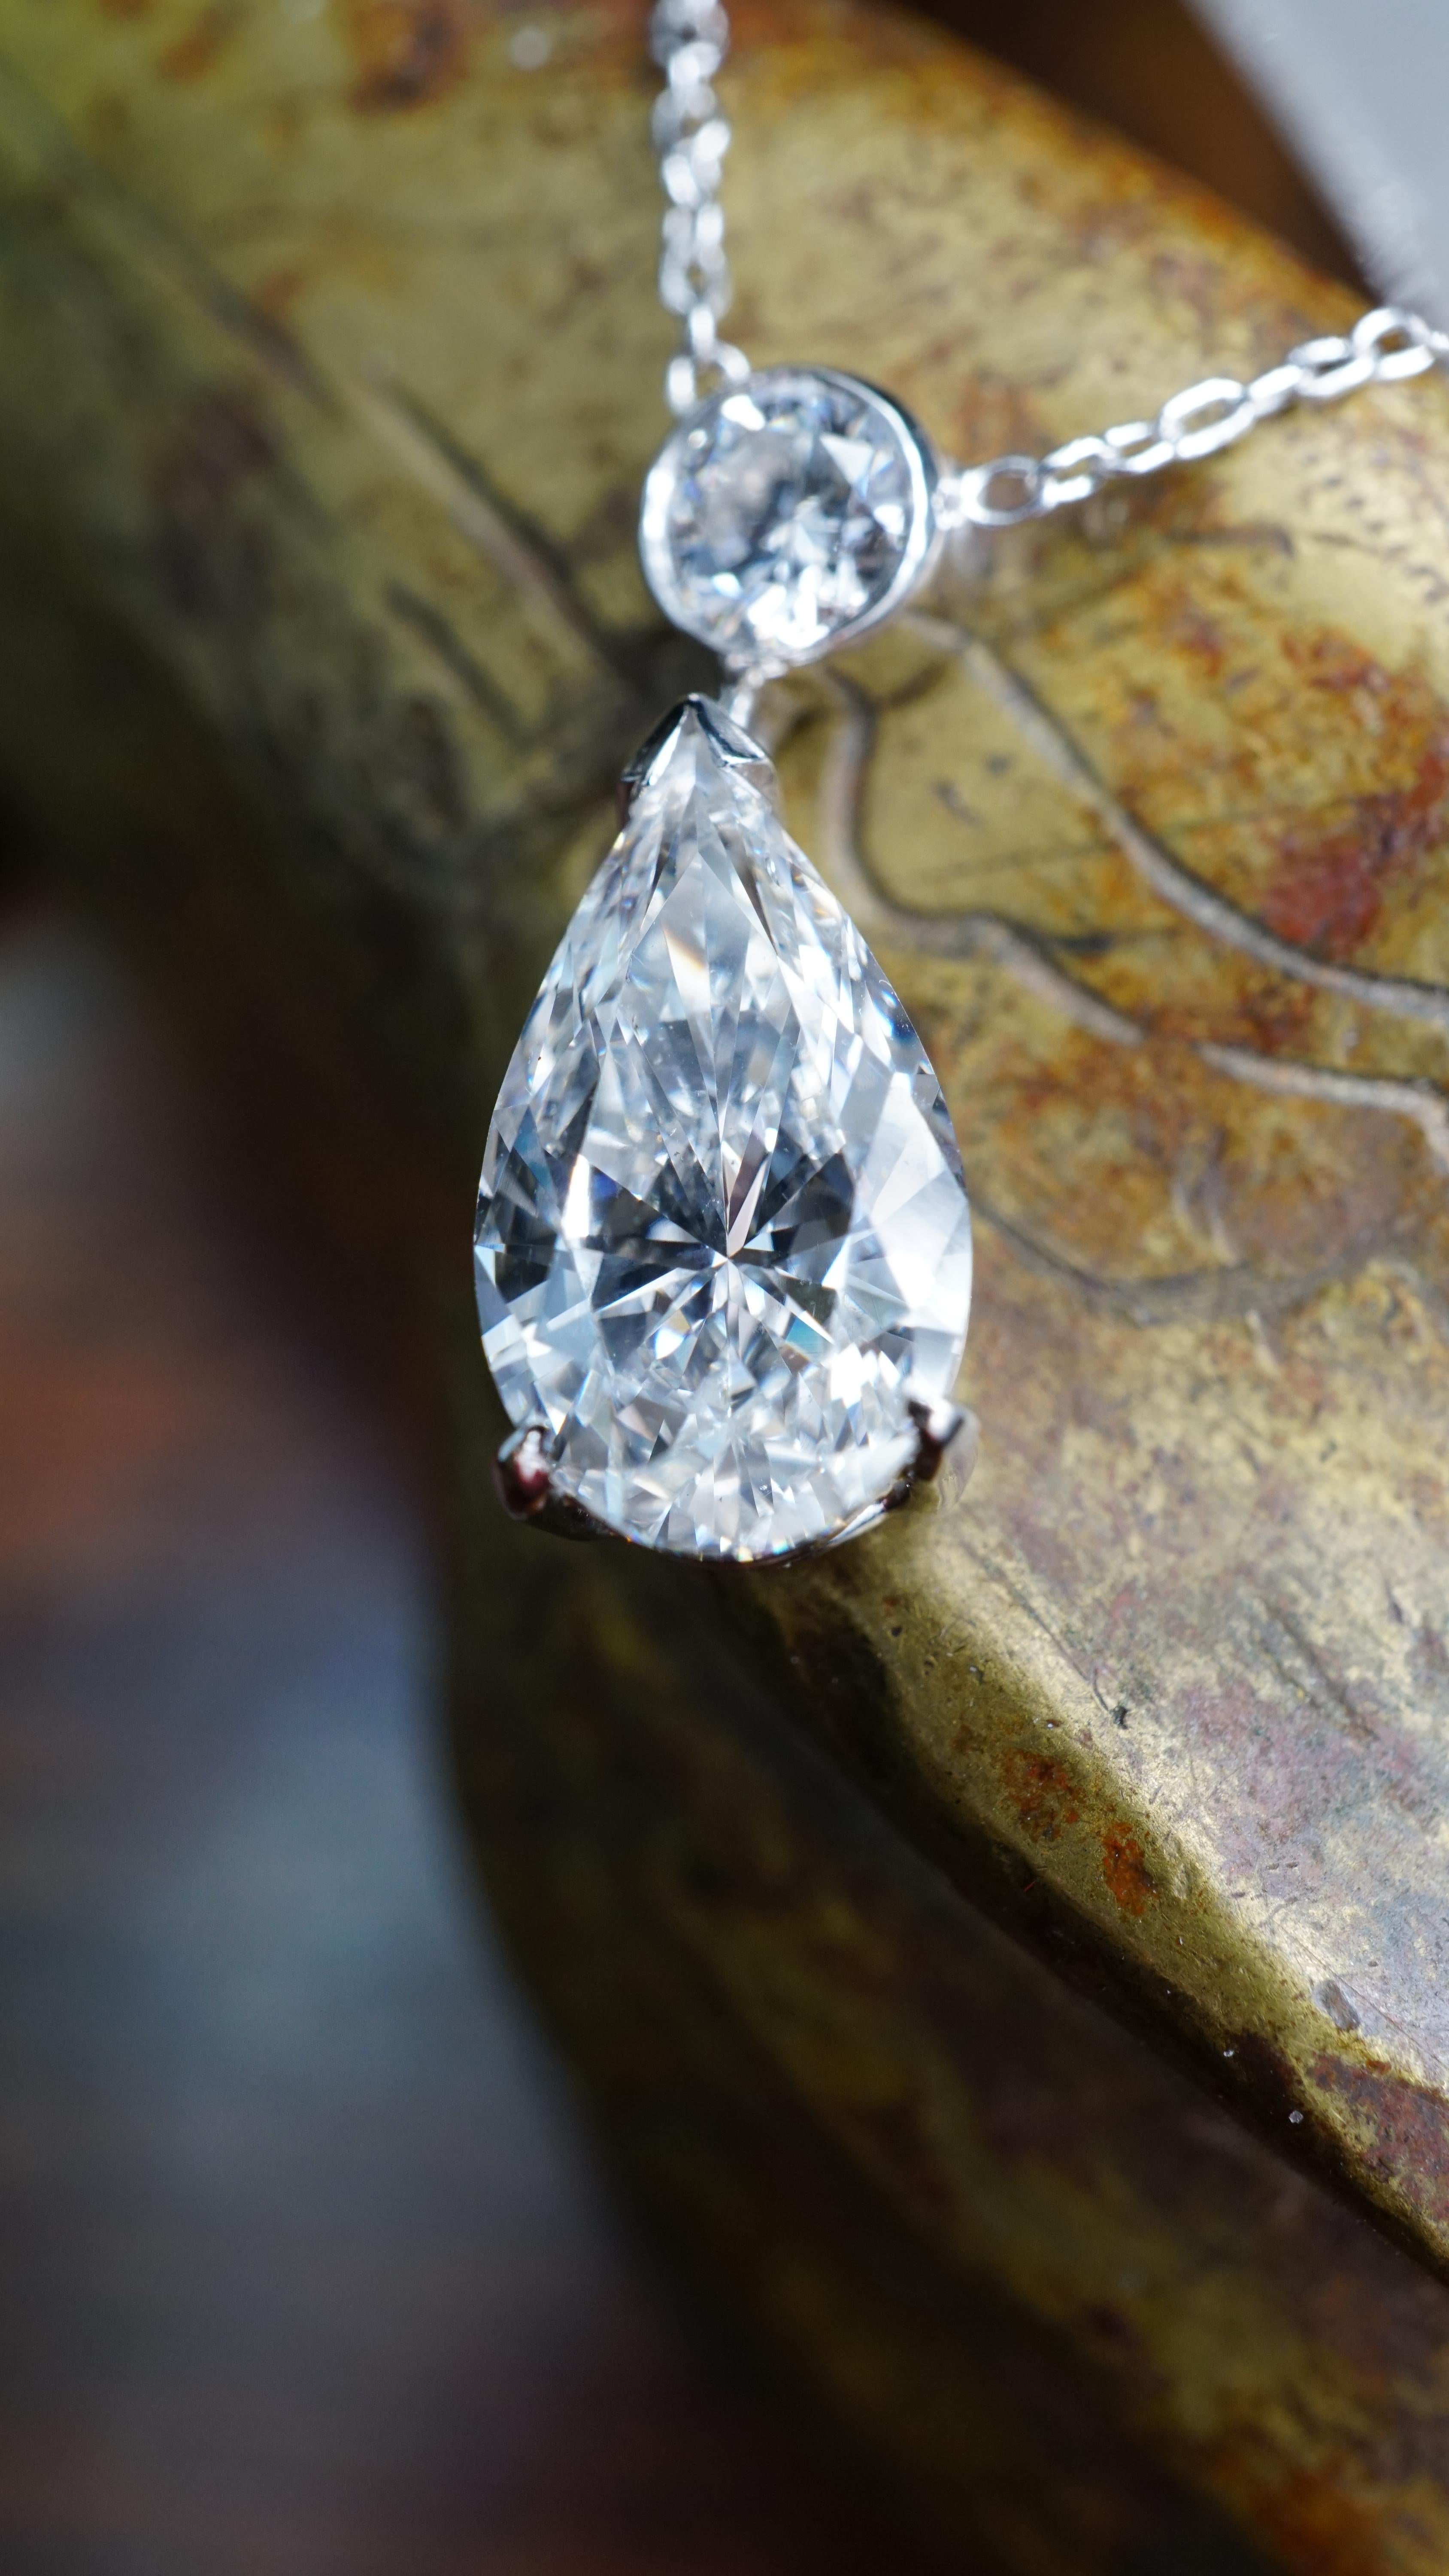 2.50 carat Pear shape diamond necklace with 5 bezel set  diamonds set in Platinum.  Pear Shape diamond center stone is D SI1. Brilliant diamonds are D-E SI1. Total Carat weight: 3.80 carat. Length is 17